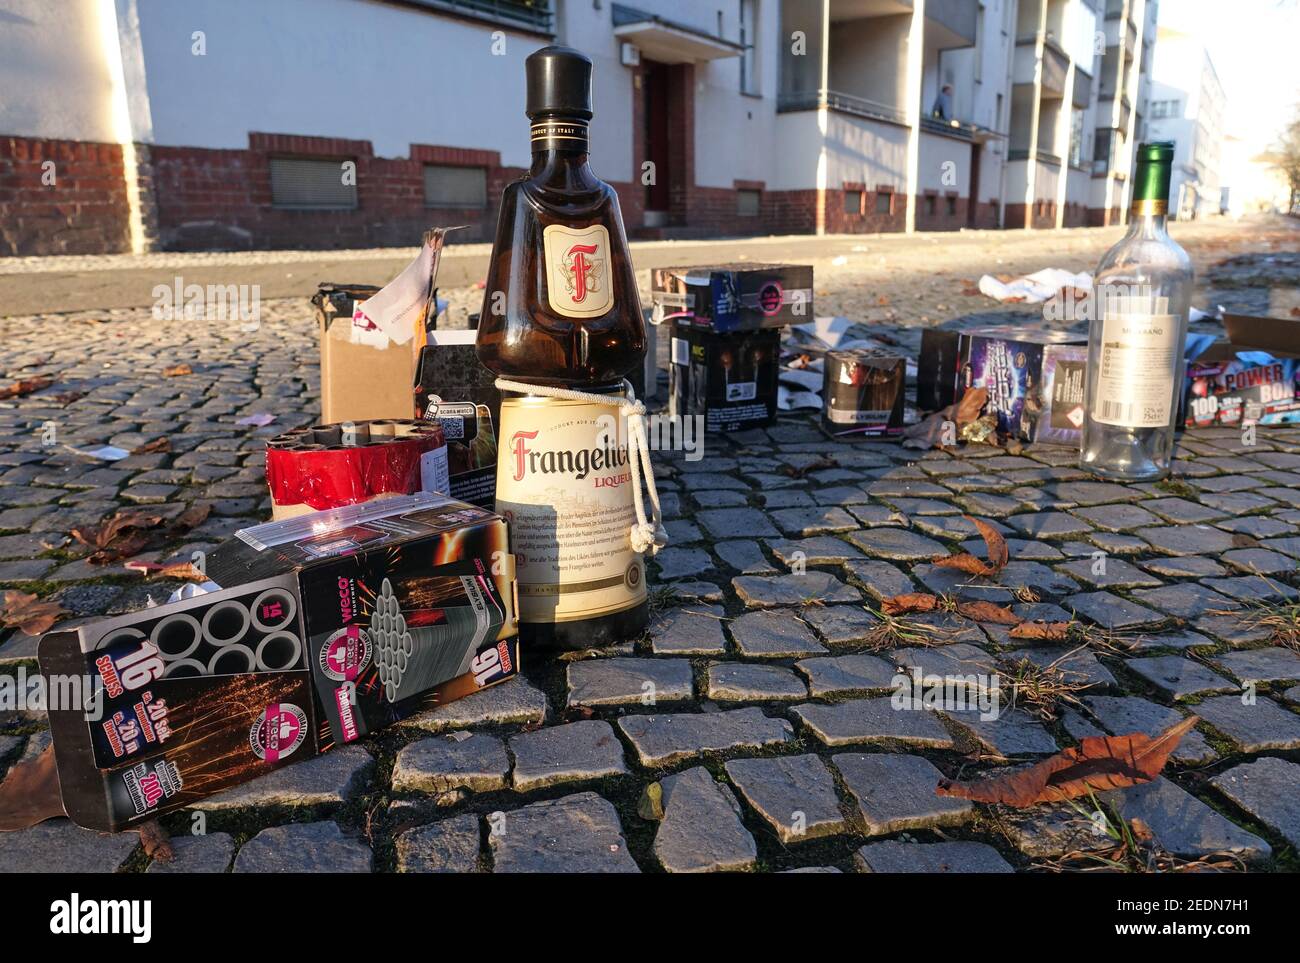 02.01.2020, Berlin, Saxony, Germany - New Year's Eve fireworks packaging and bottles on a pavement.. 00S200102D297CAROEX.JPG [MODEL RELEASE: NO, PROPE Stock Photo